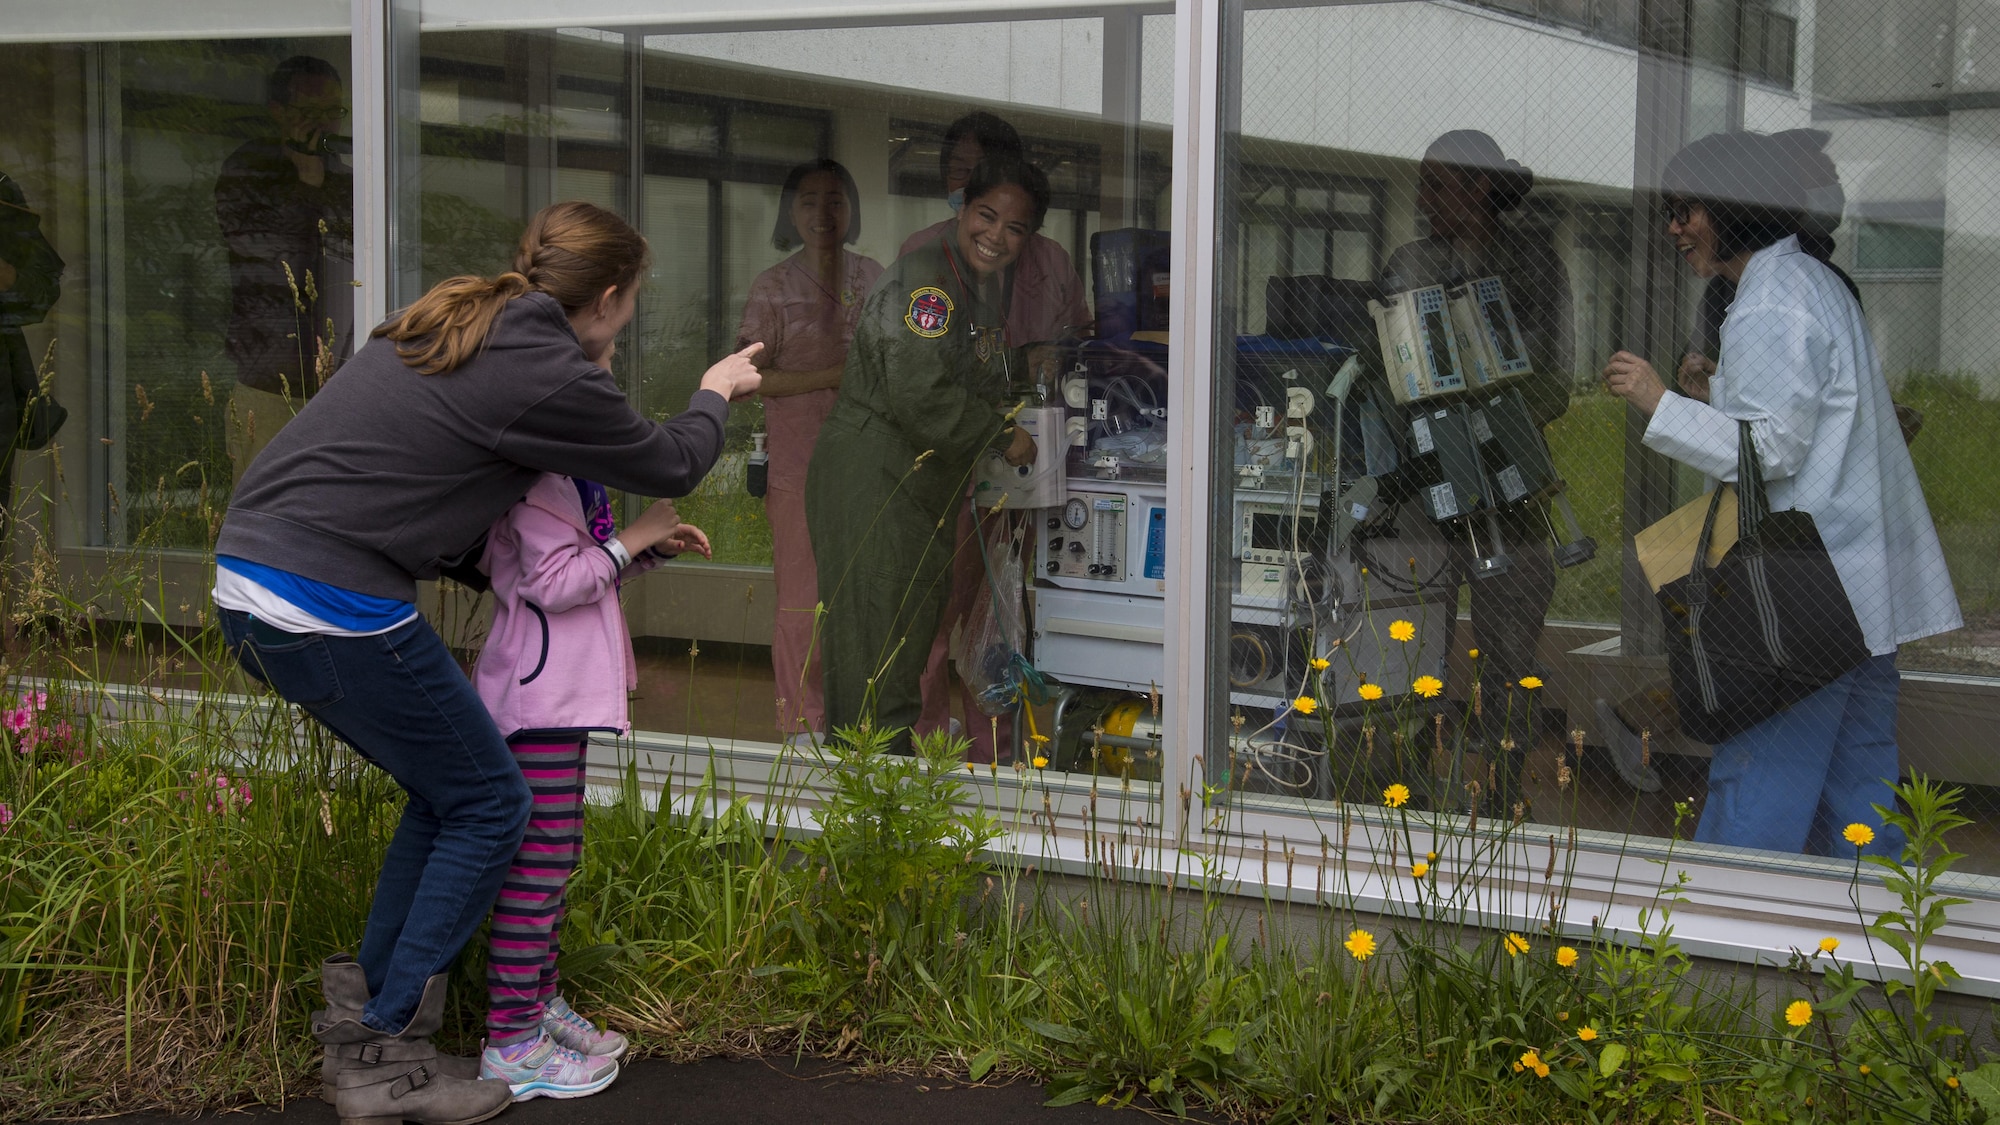 Katherine and Emmeline McKeown, spouse and daughter of U.S. Air Force Capt. Connor McKeown, waves to Oliver McKeown through the Aomori Hospital window prior to the aeromedical evacuation in Aomori, Japan, June 16, 2017. For Emmeline, this was the first time seeing her brother. Once the neonatal intensive care unit team from the U.S. Navy hospital, Okinawa, Japan, prepared Oliver for the flight, they transferred him to the Aomori Airport for departure. (U.S. Air Force photo by Senior Airman Deana Heitzman)